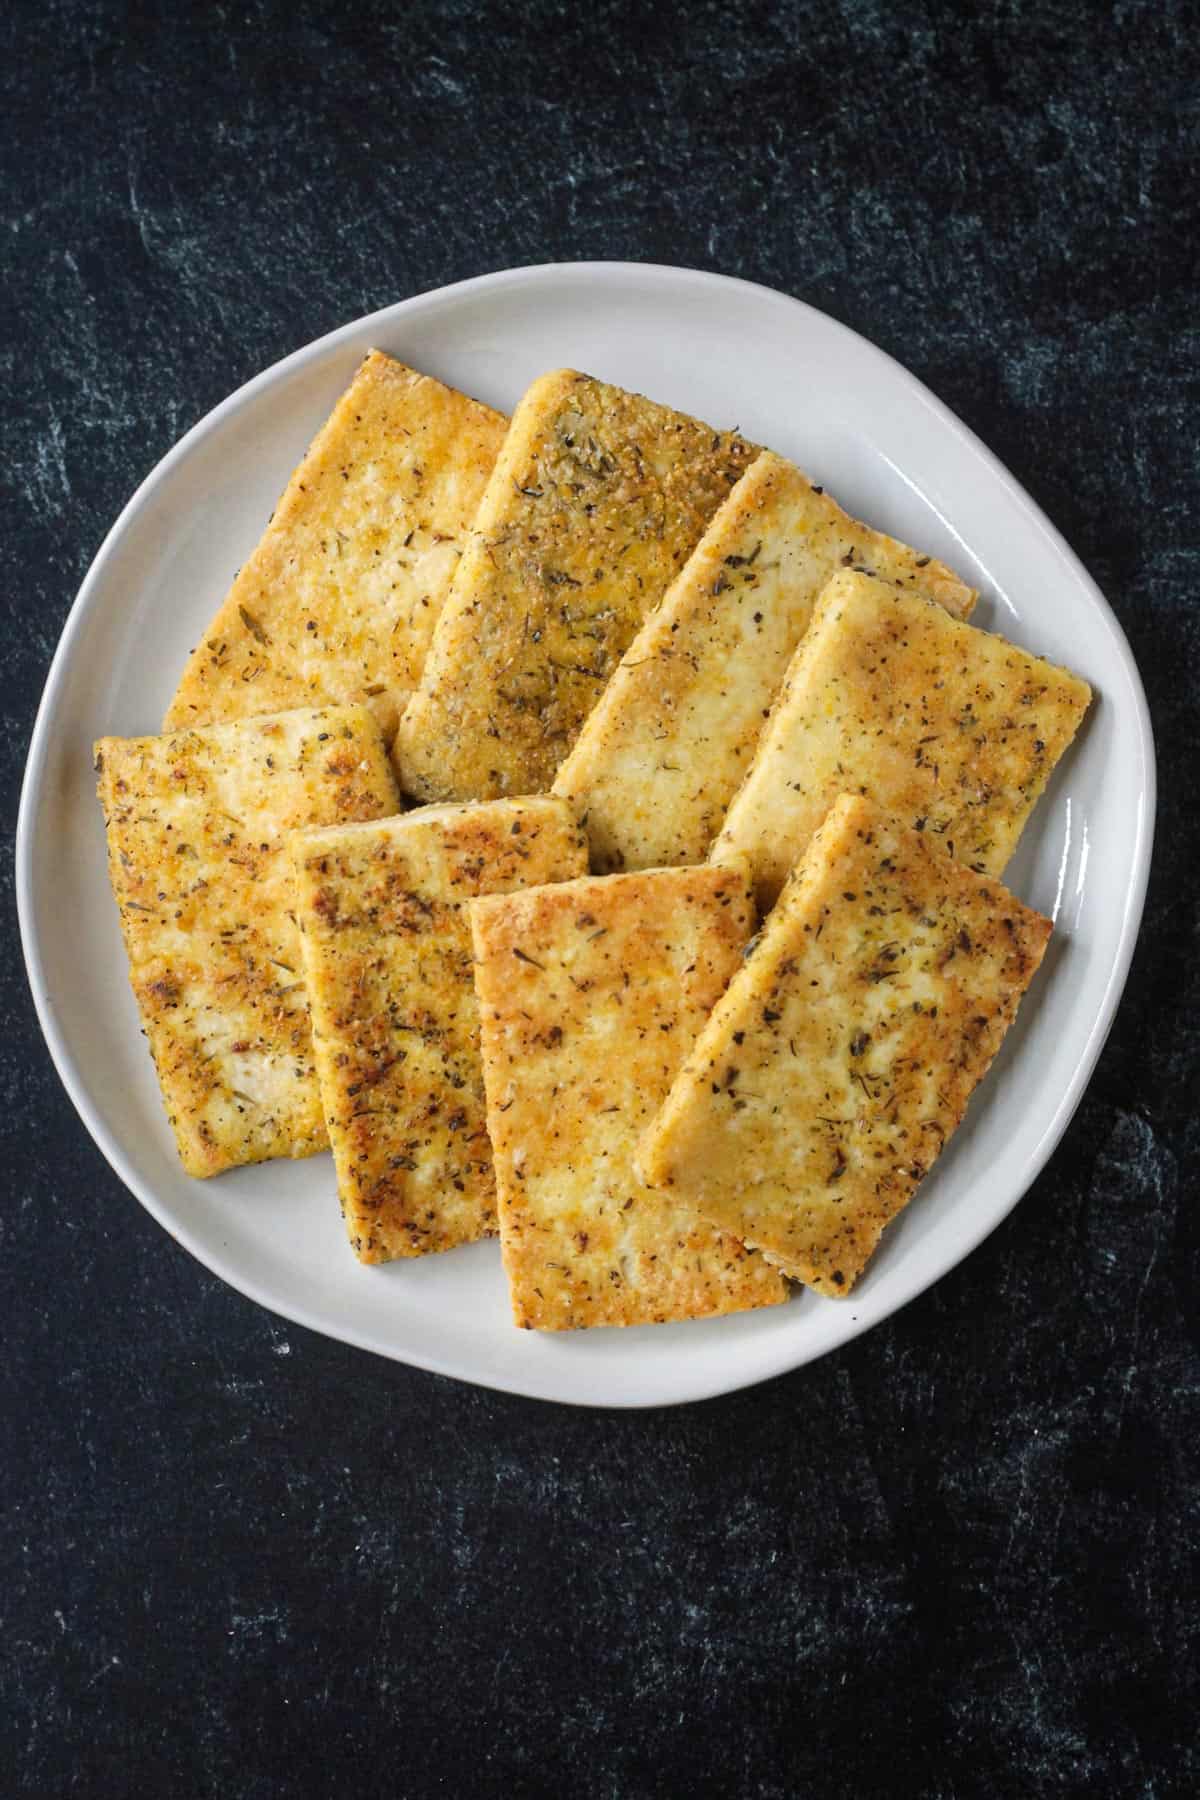 Eight slices of golden pan fried tofu.